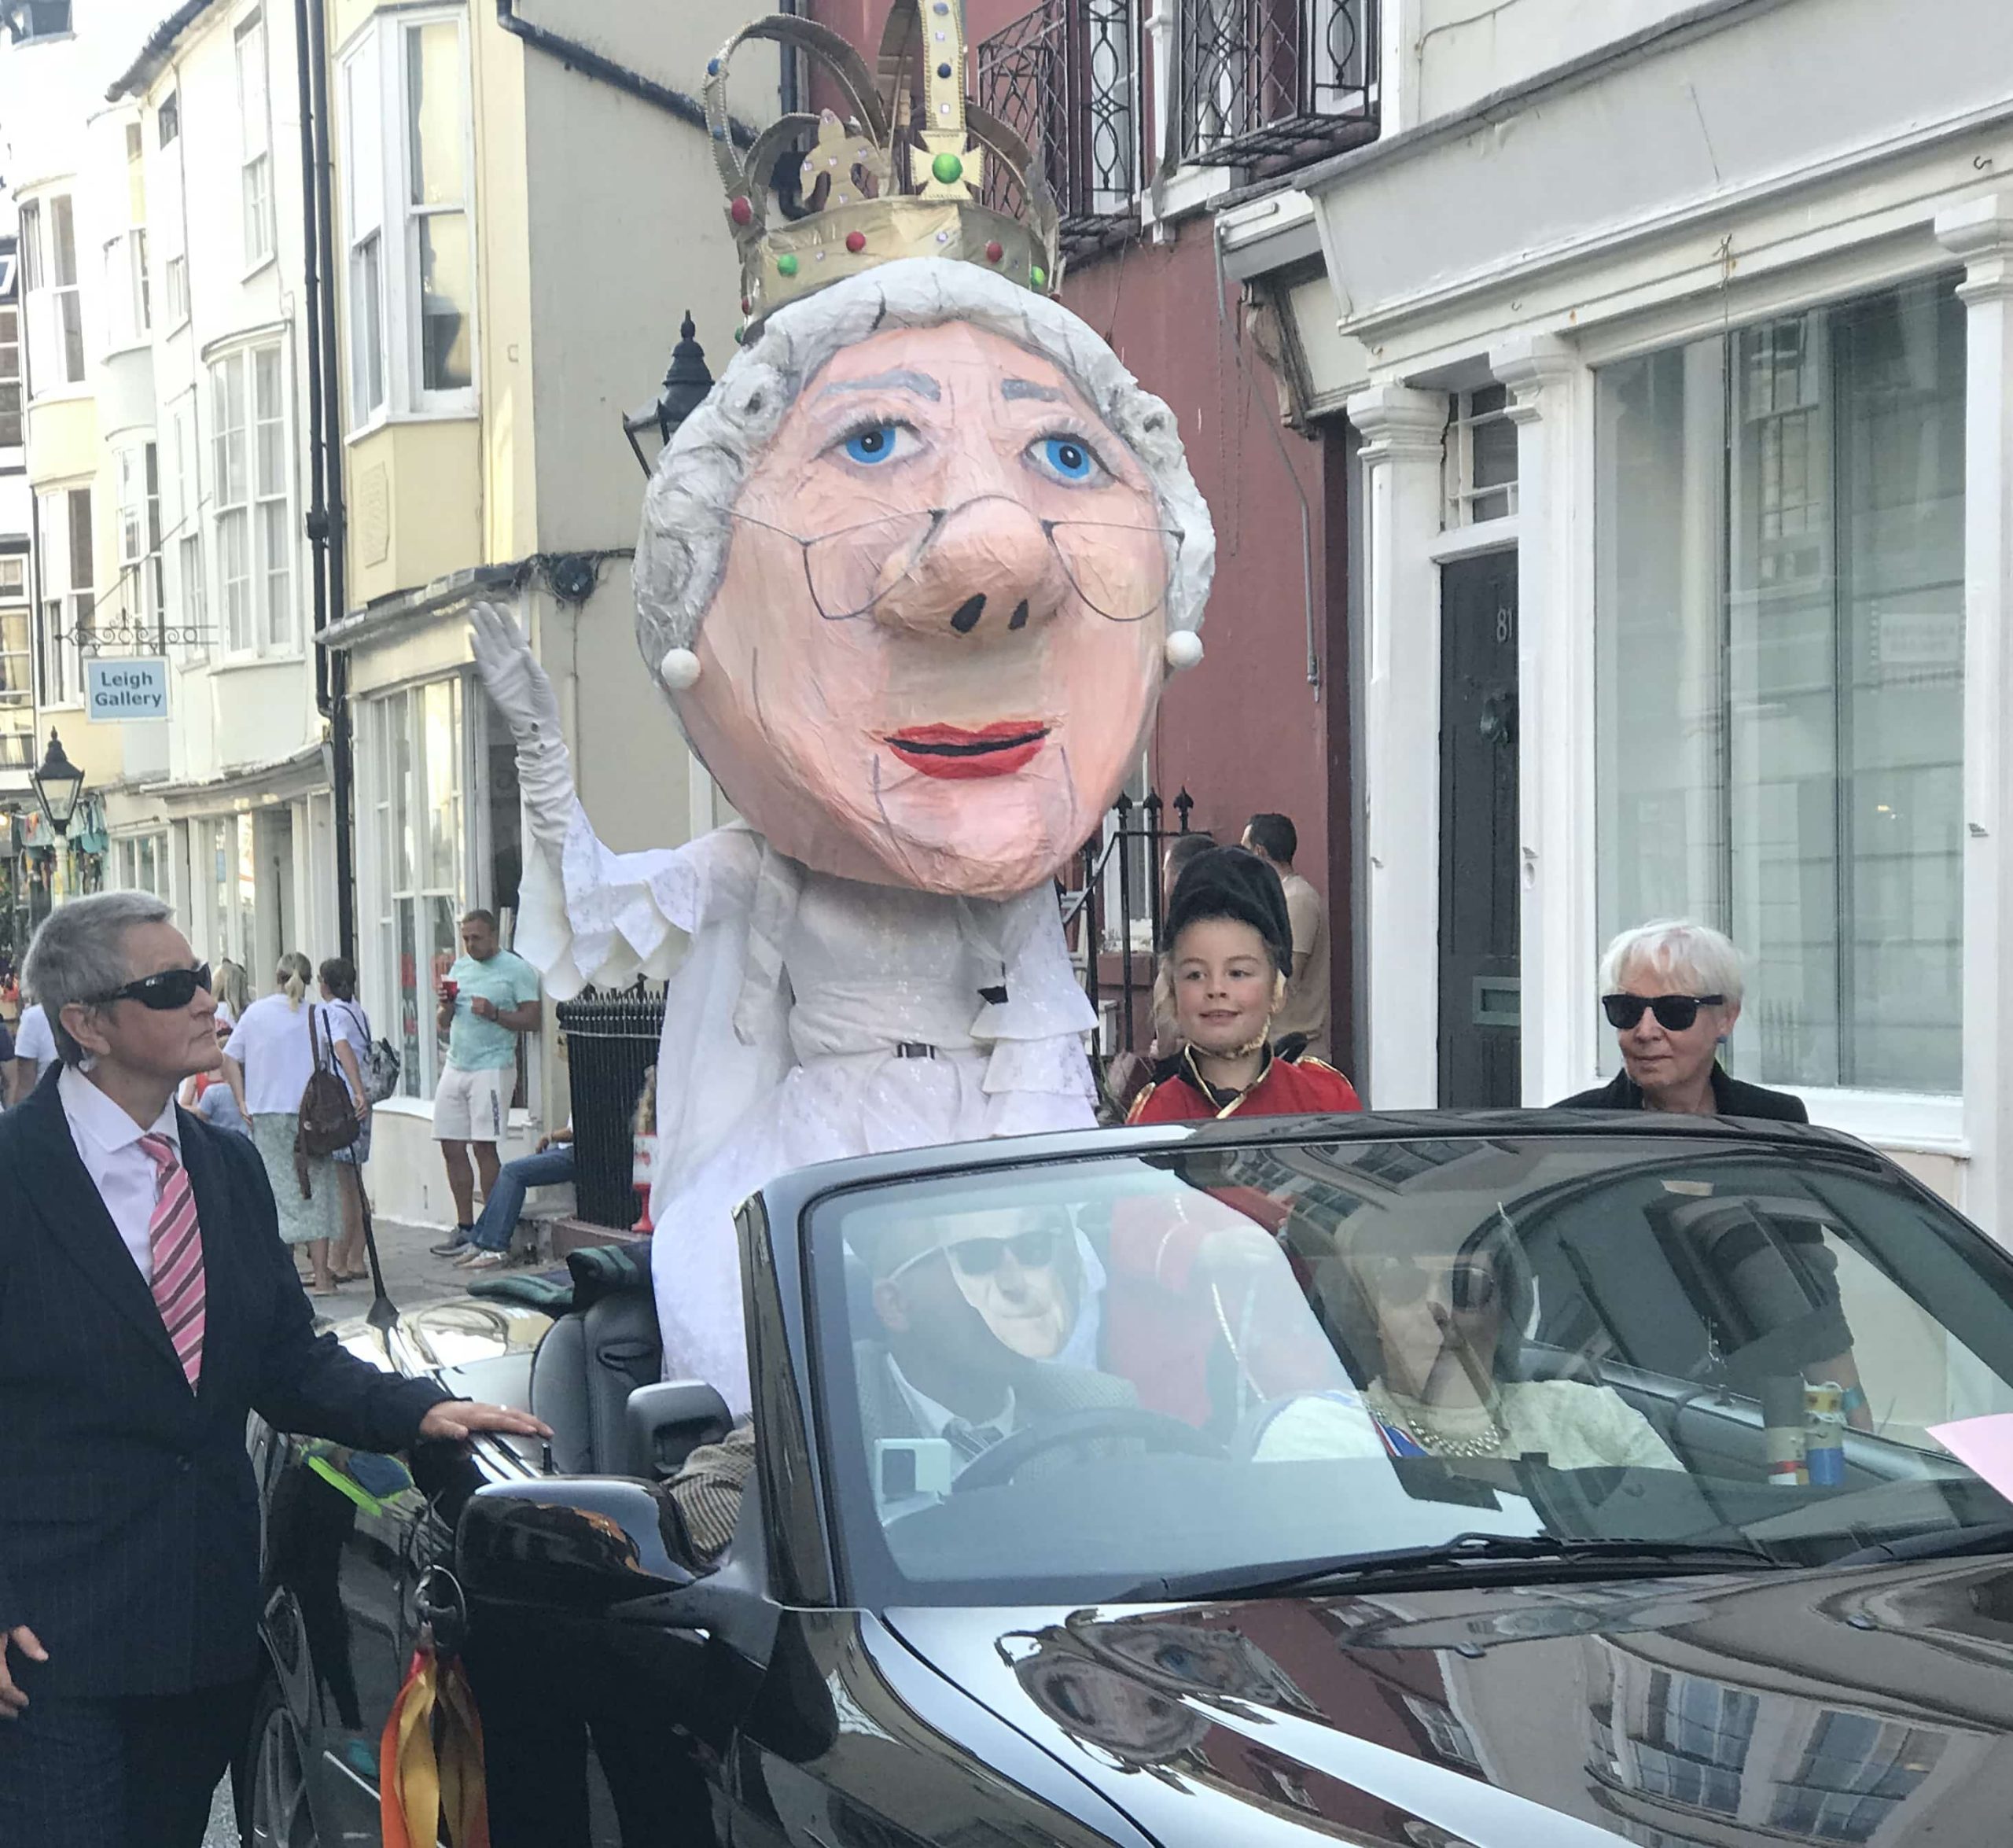 Queen Elizabeth II puppet at Hastings Old Town Carnival, MSL 